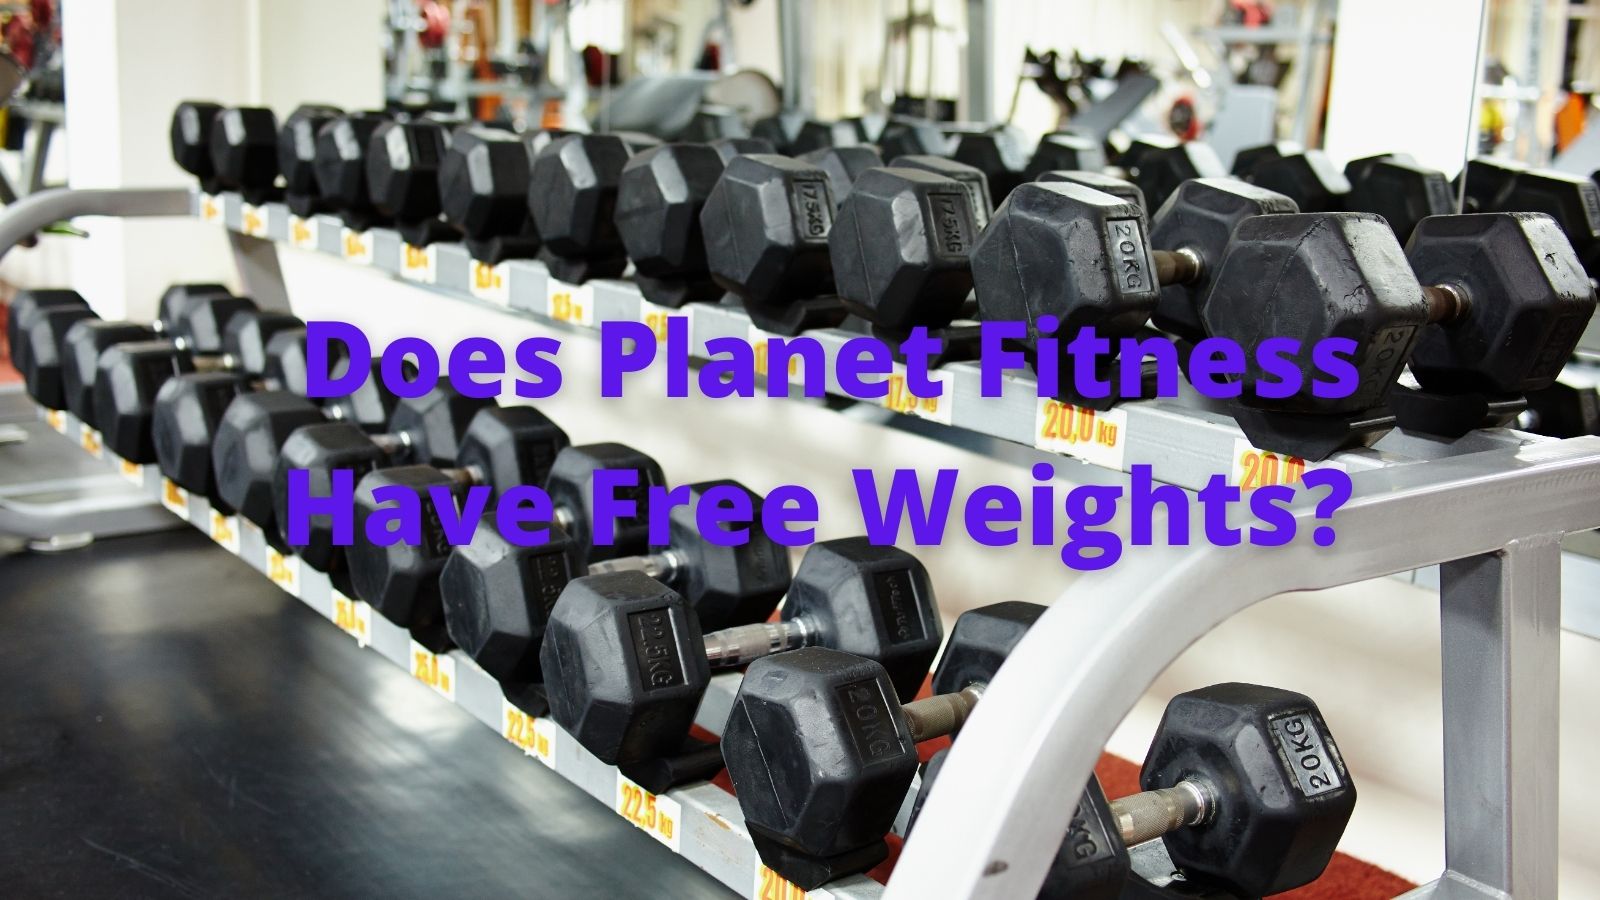  How Many Annual Fees Does Planet Fitness Have for Build Muscle